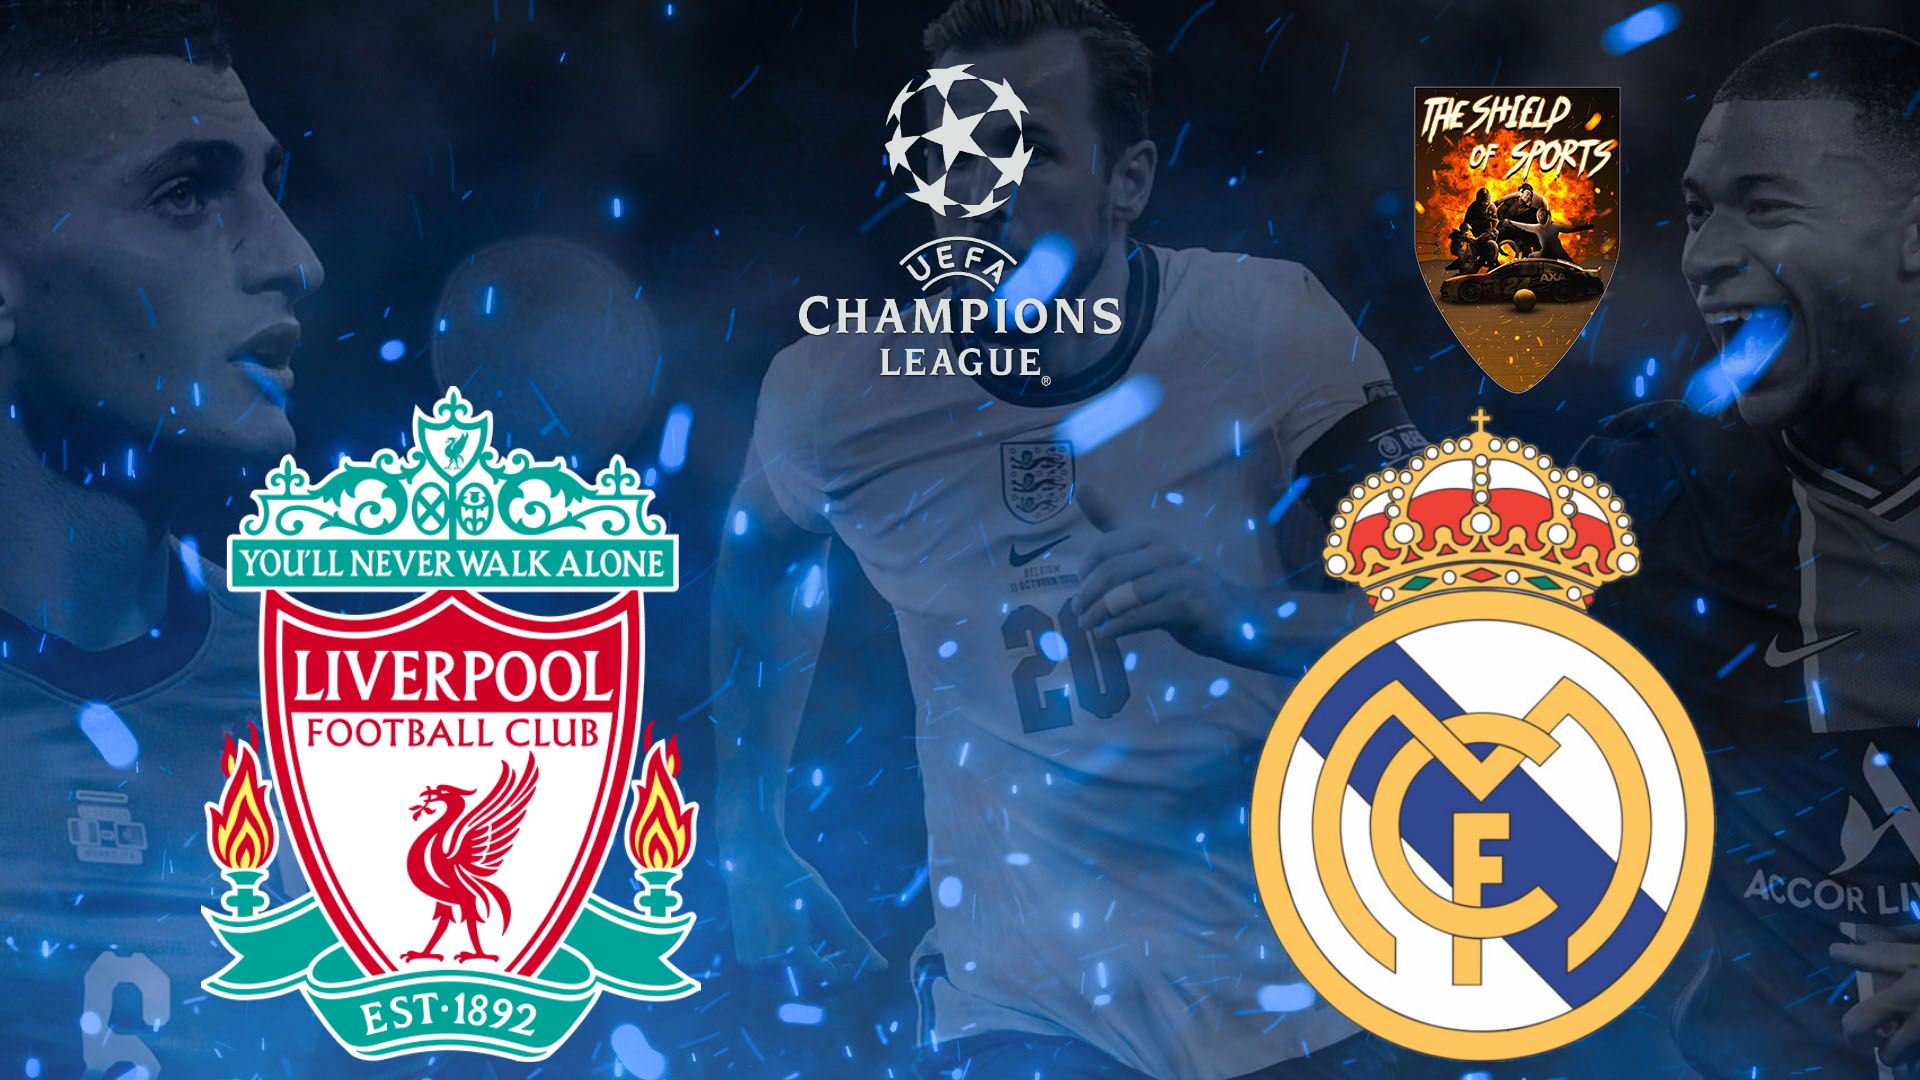 Champions League: Liverpool vs Real Madrid - LIVE